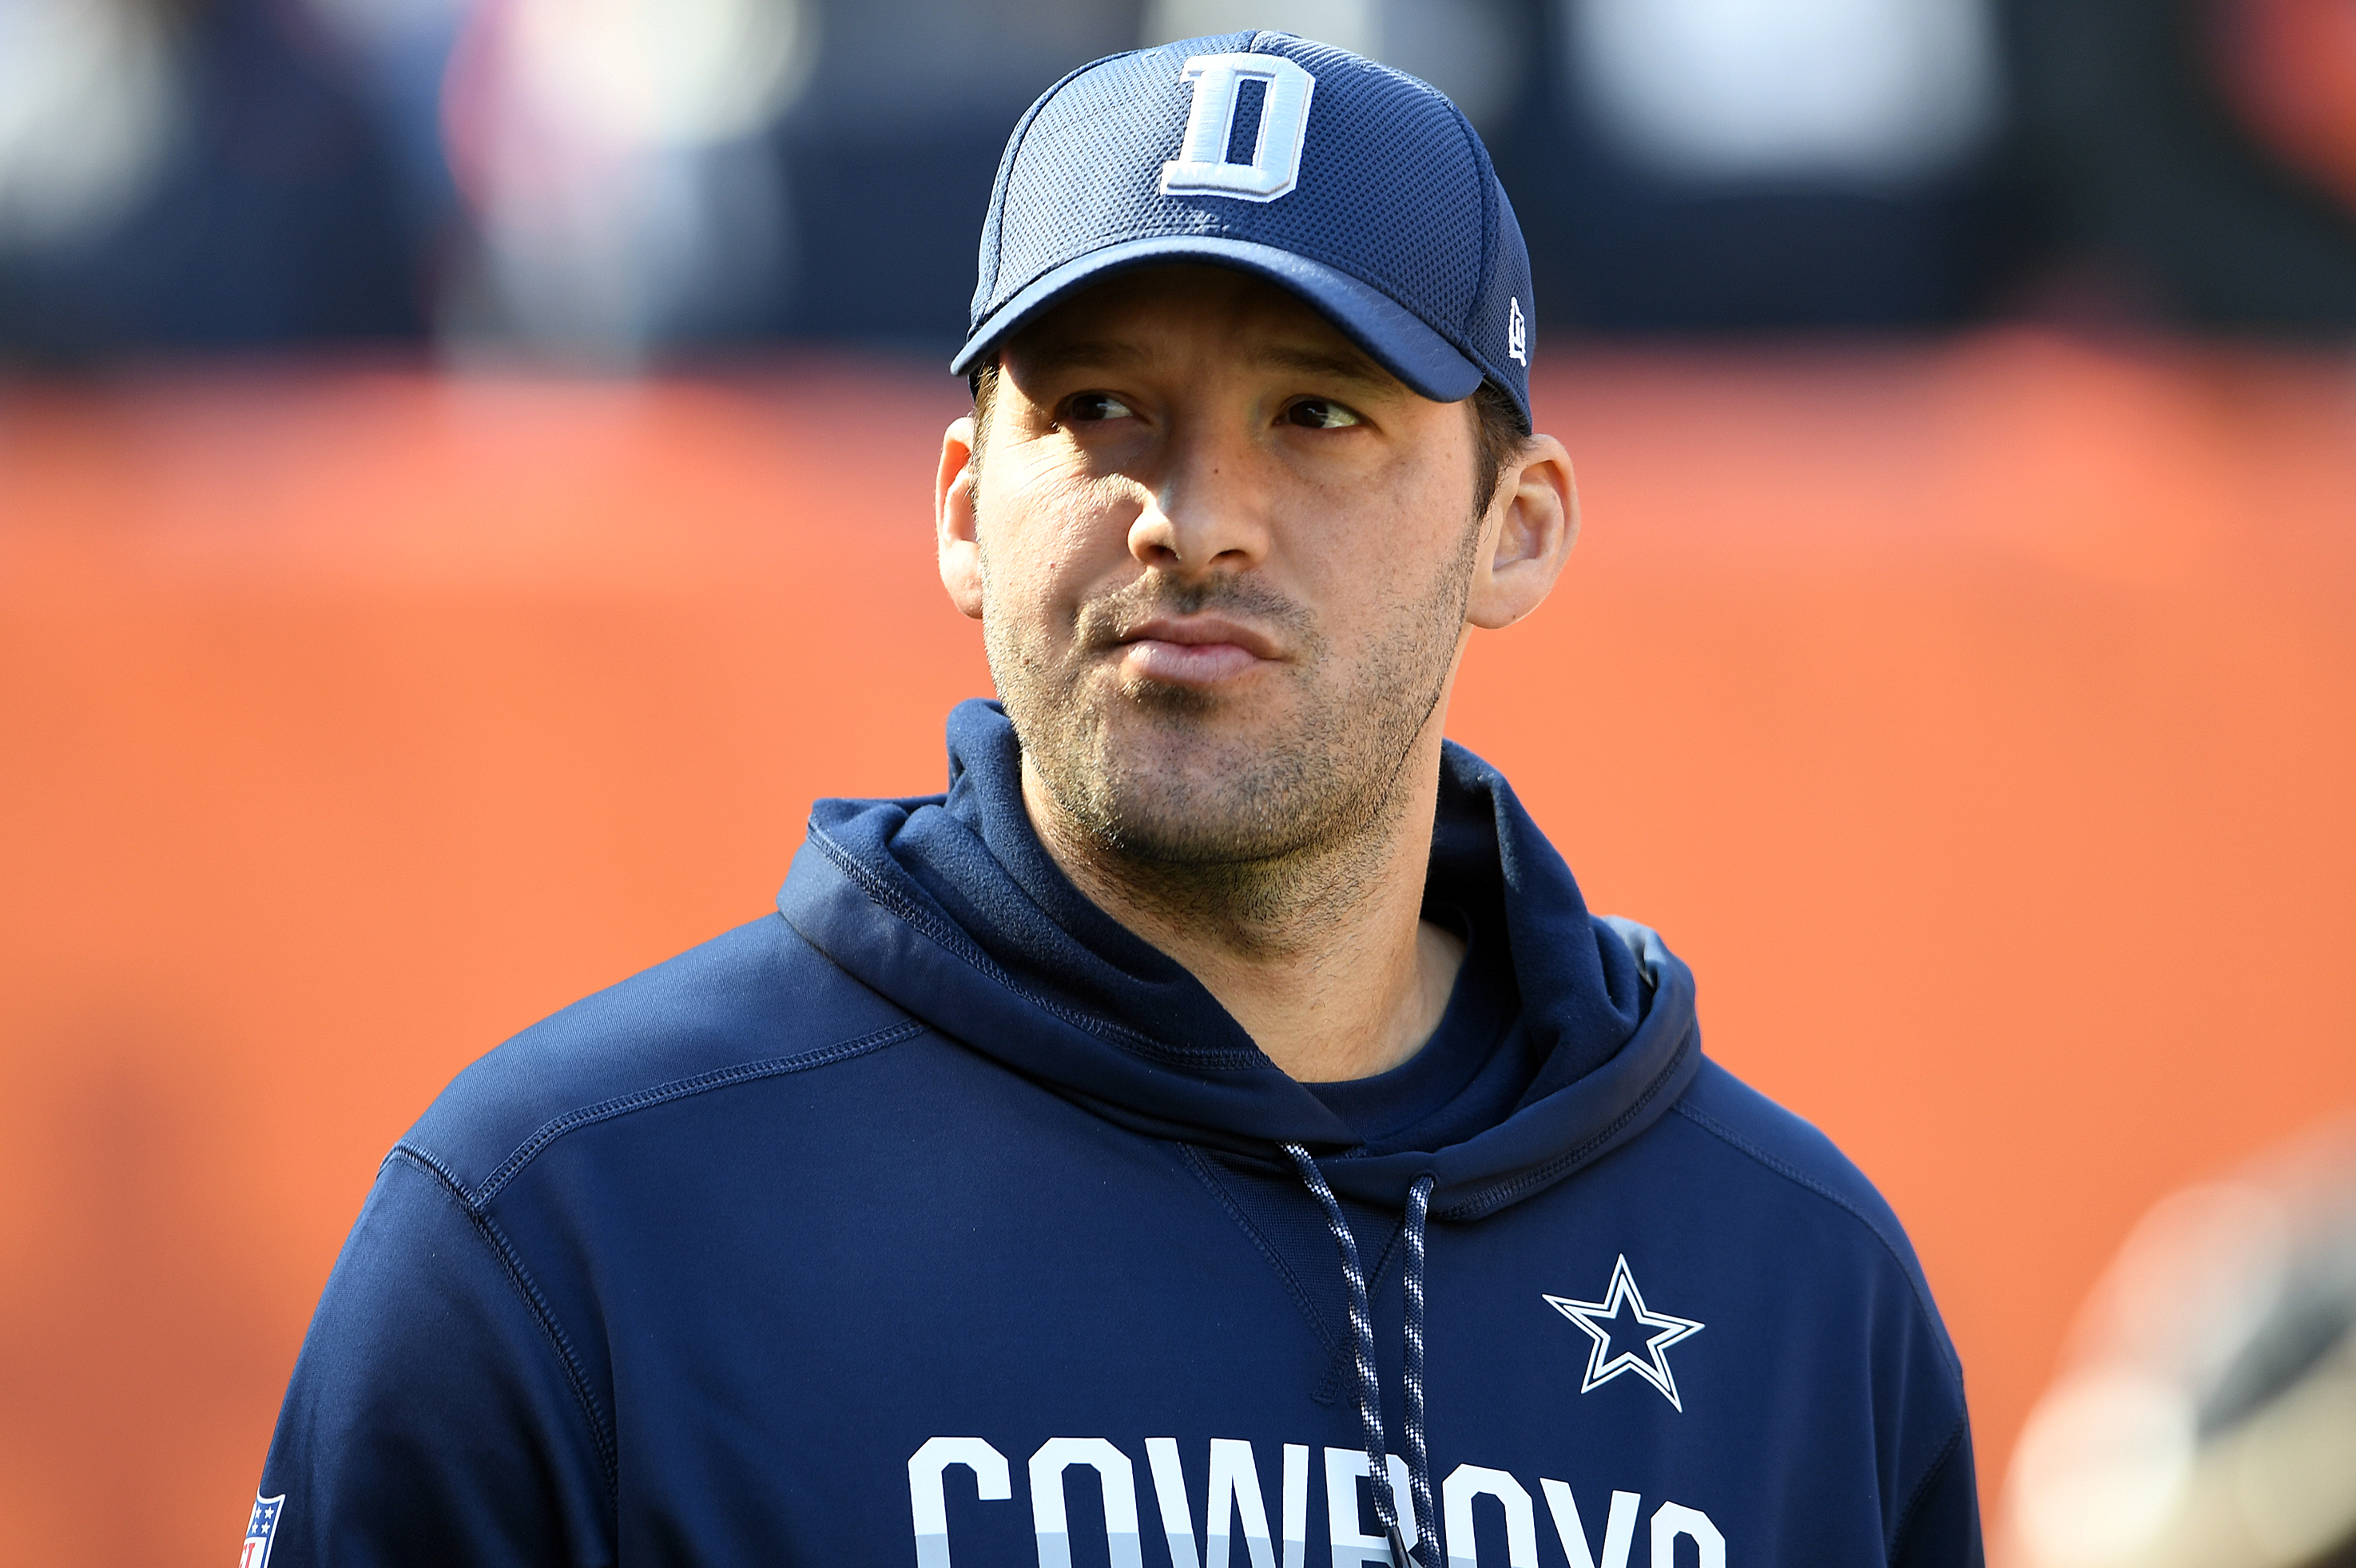 A Self-Made Star, Tony Romo May Not Be Done Yet as an NFL